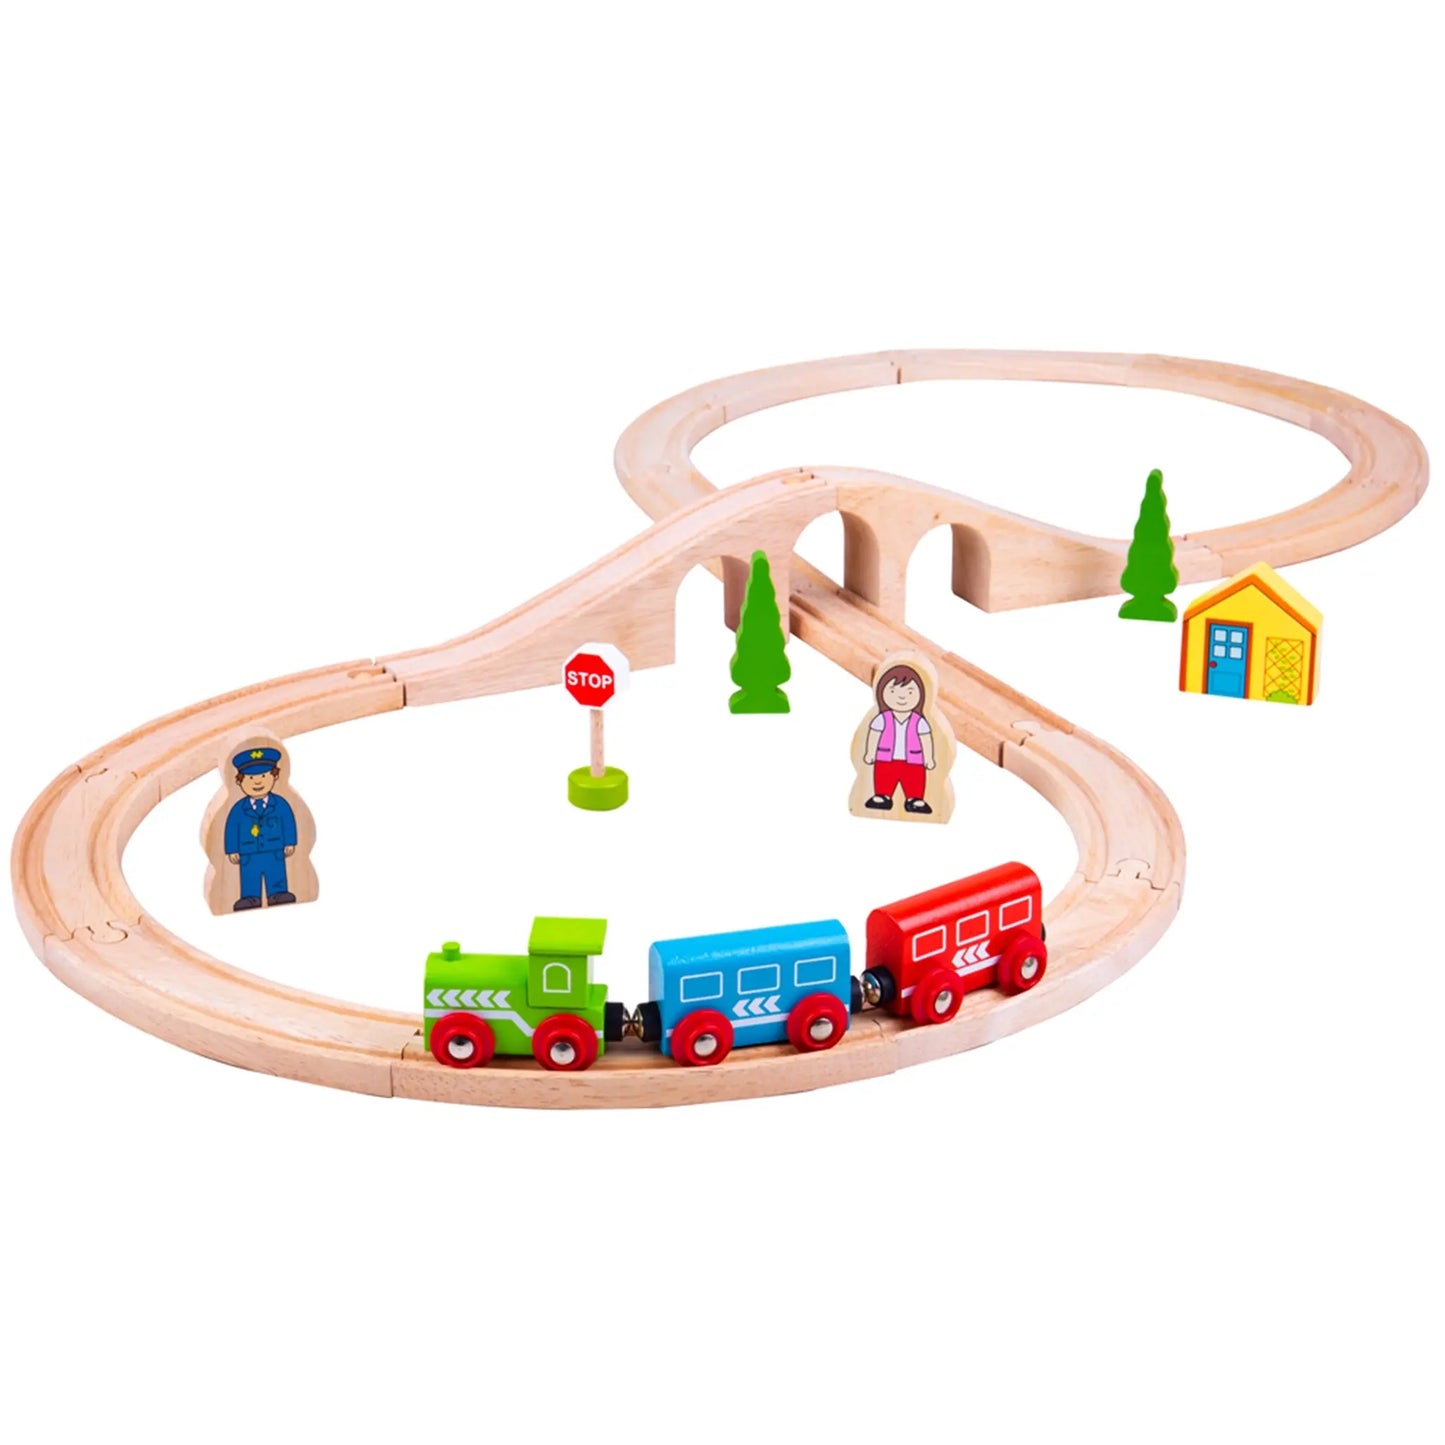 Figure of Eight Train Set - Bigjigs Toys - The Forgotten Toy Shop